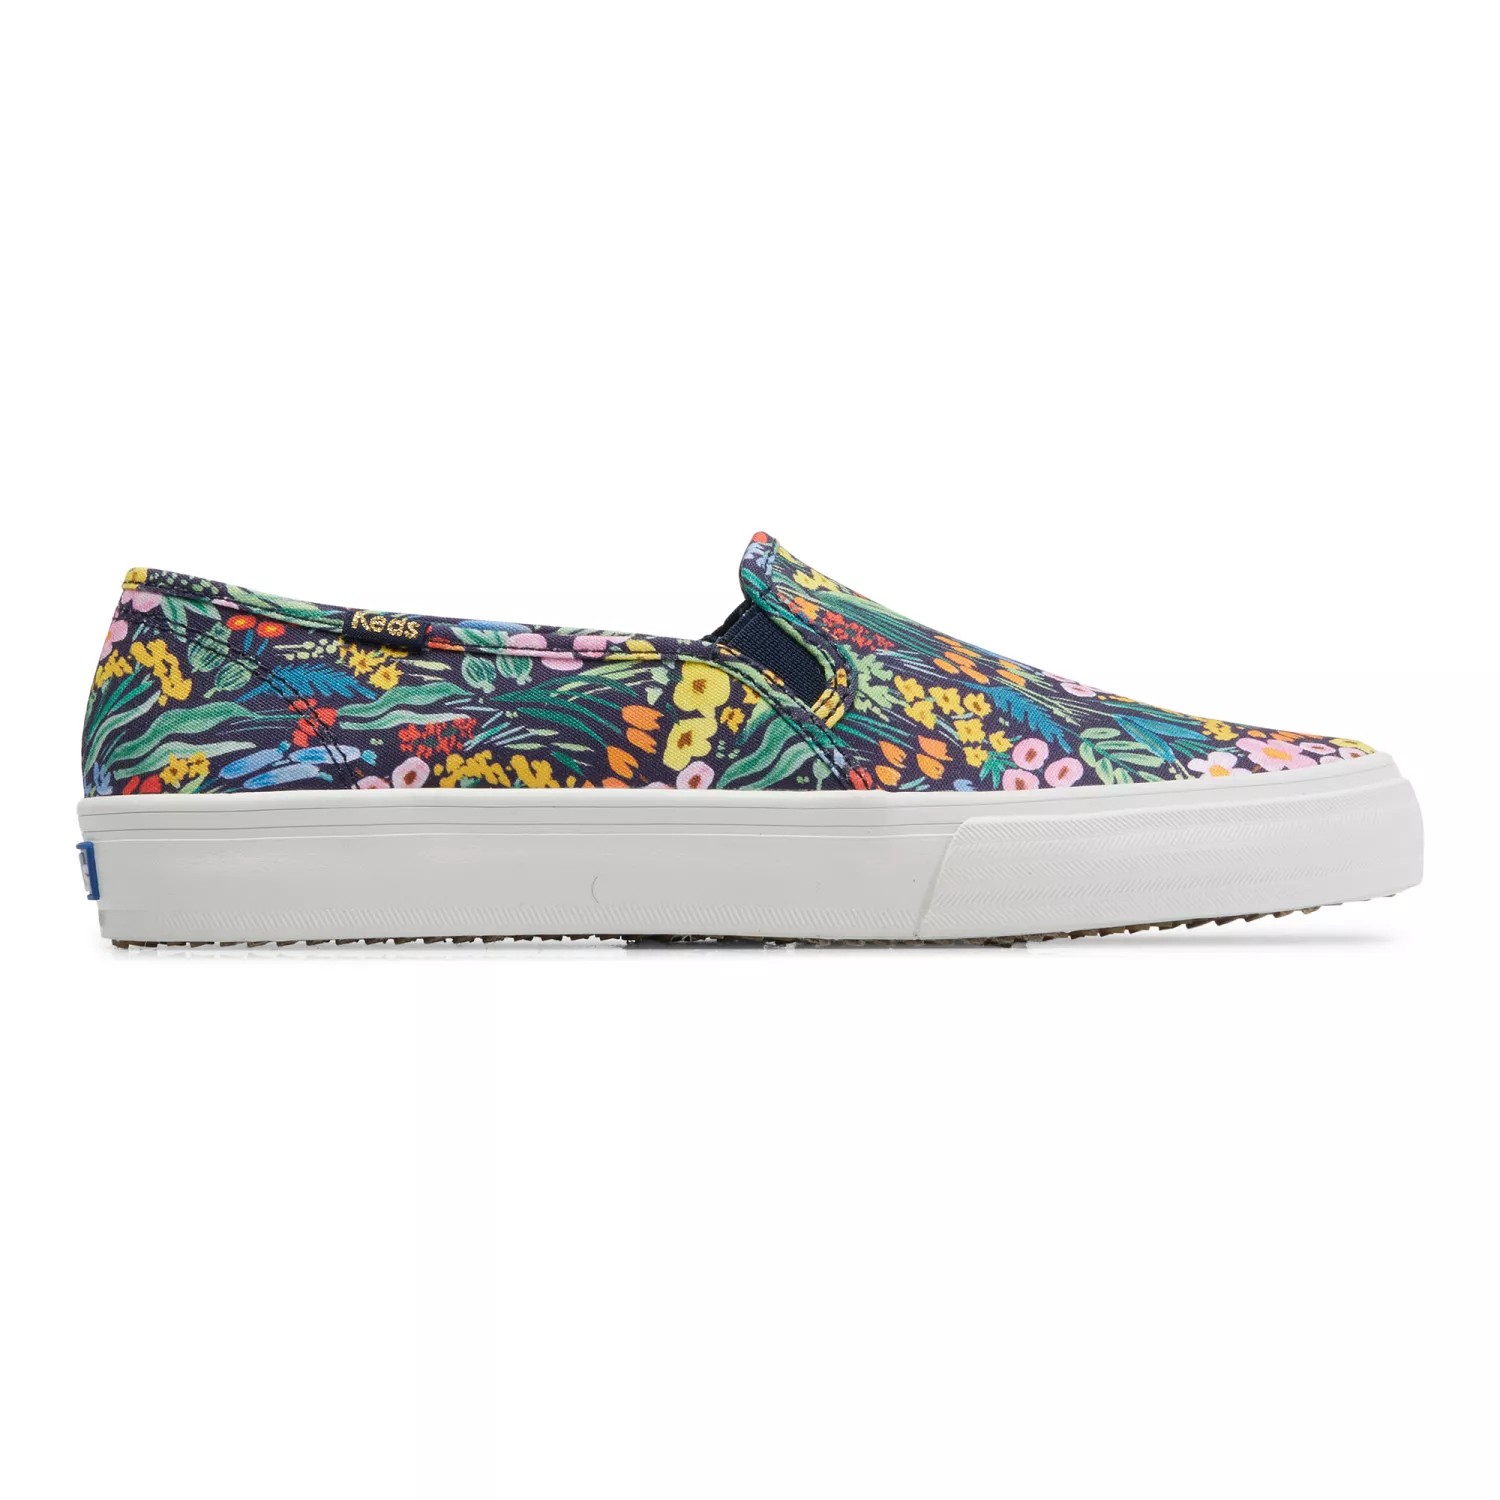 Keds x Rifle Paper Co. Double Decker Slip On - Free Shipping | KEDS